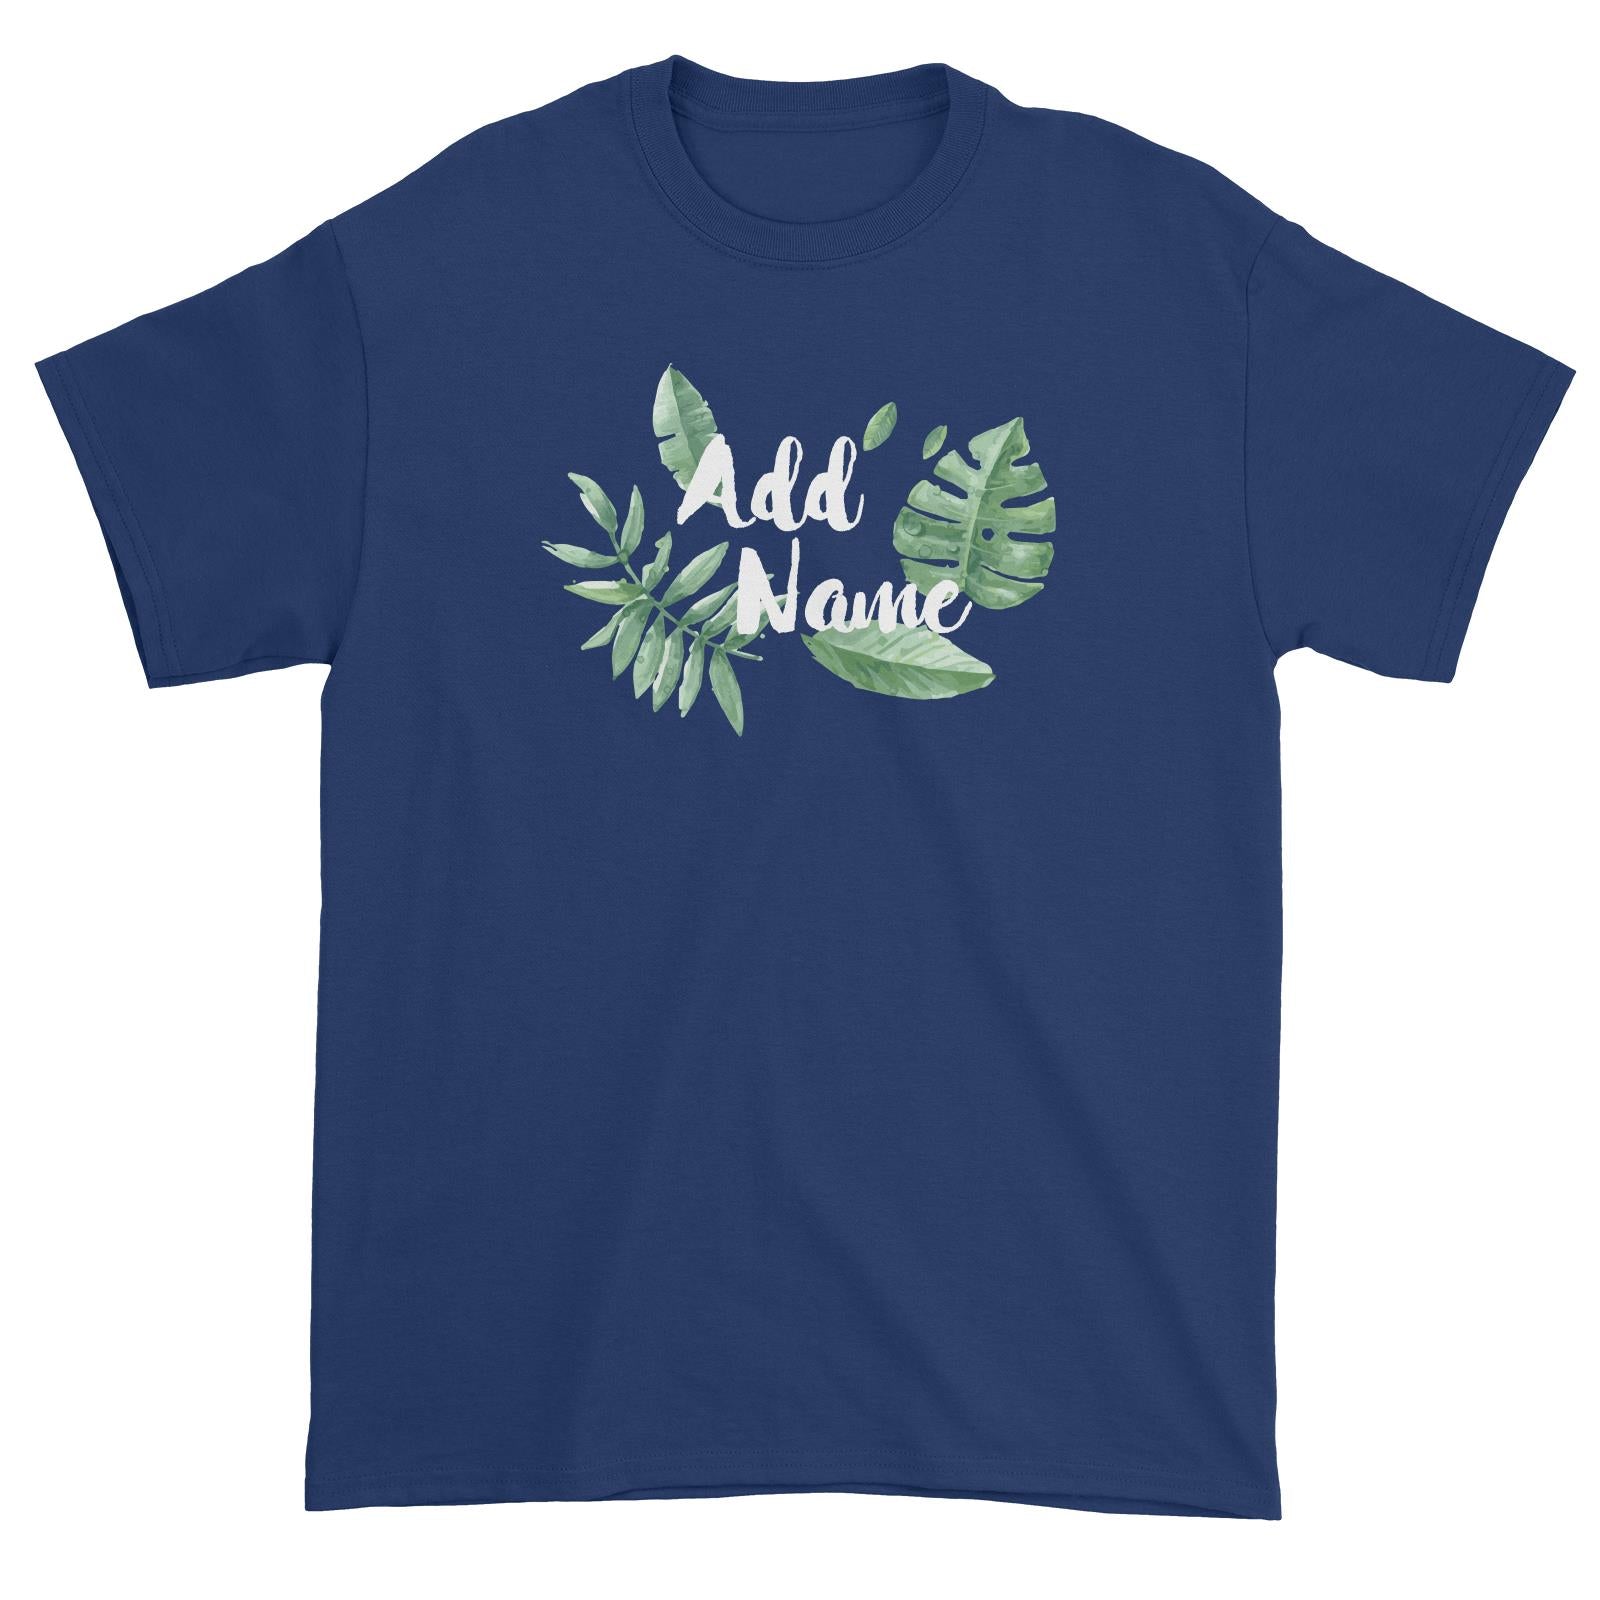 Tropical Leaves Addname Unisex T-Shirt Basic Matching Family